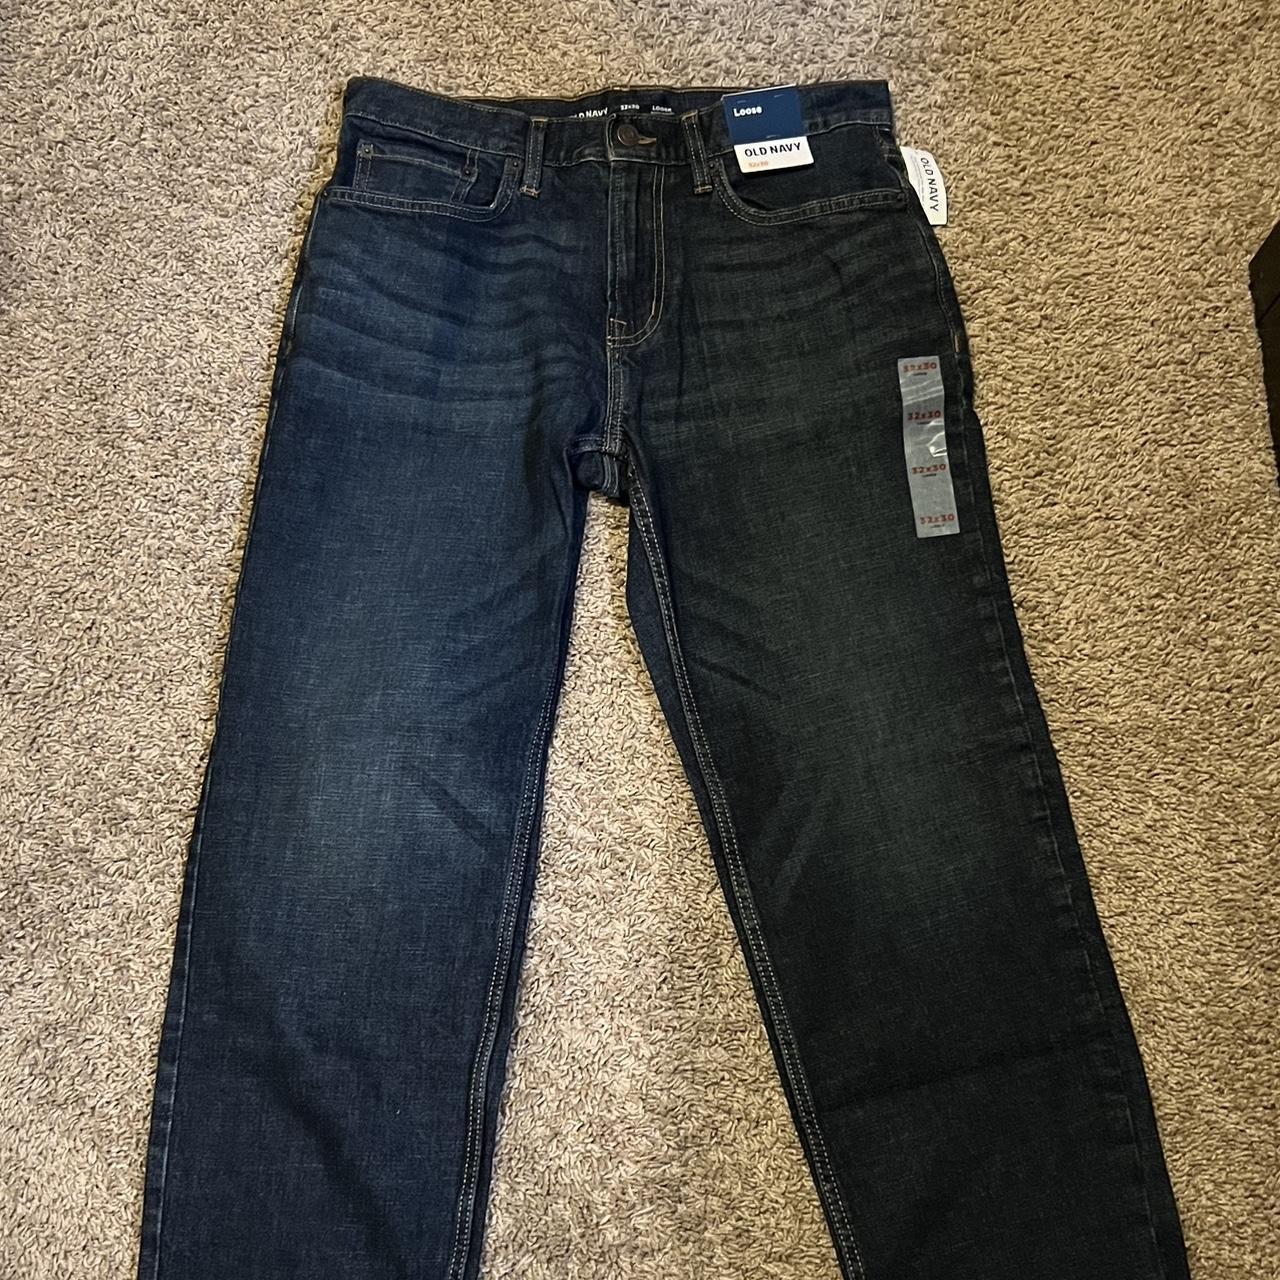 Old Navy Baggy Jeans Brand New! (No Flaws!) #Y2K... - Depop